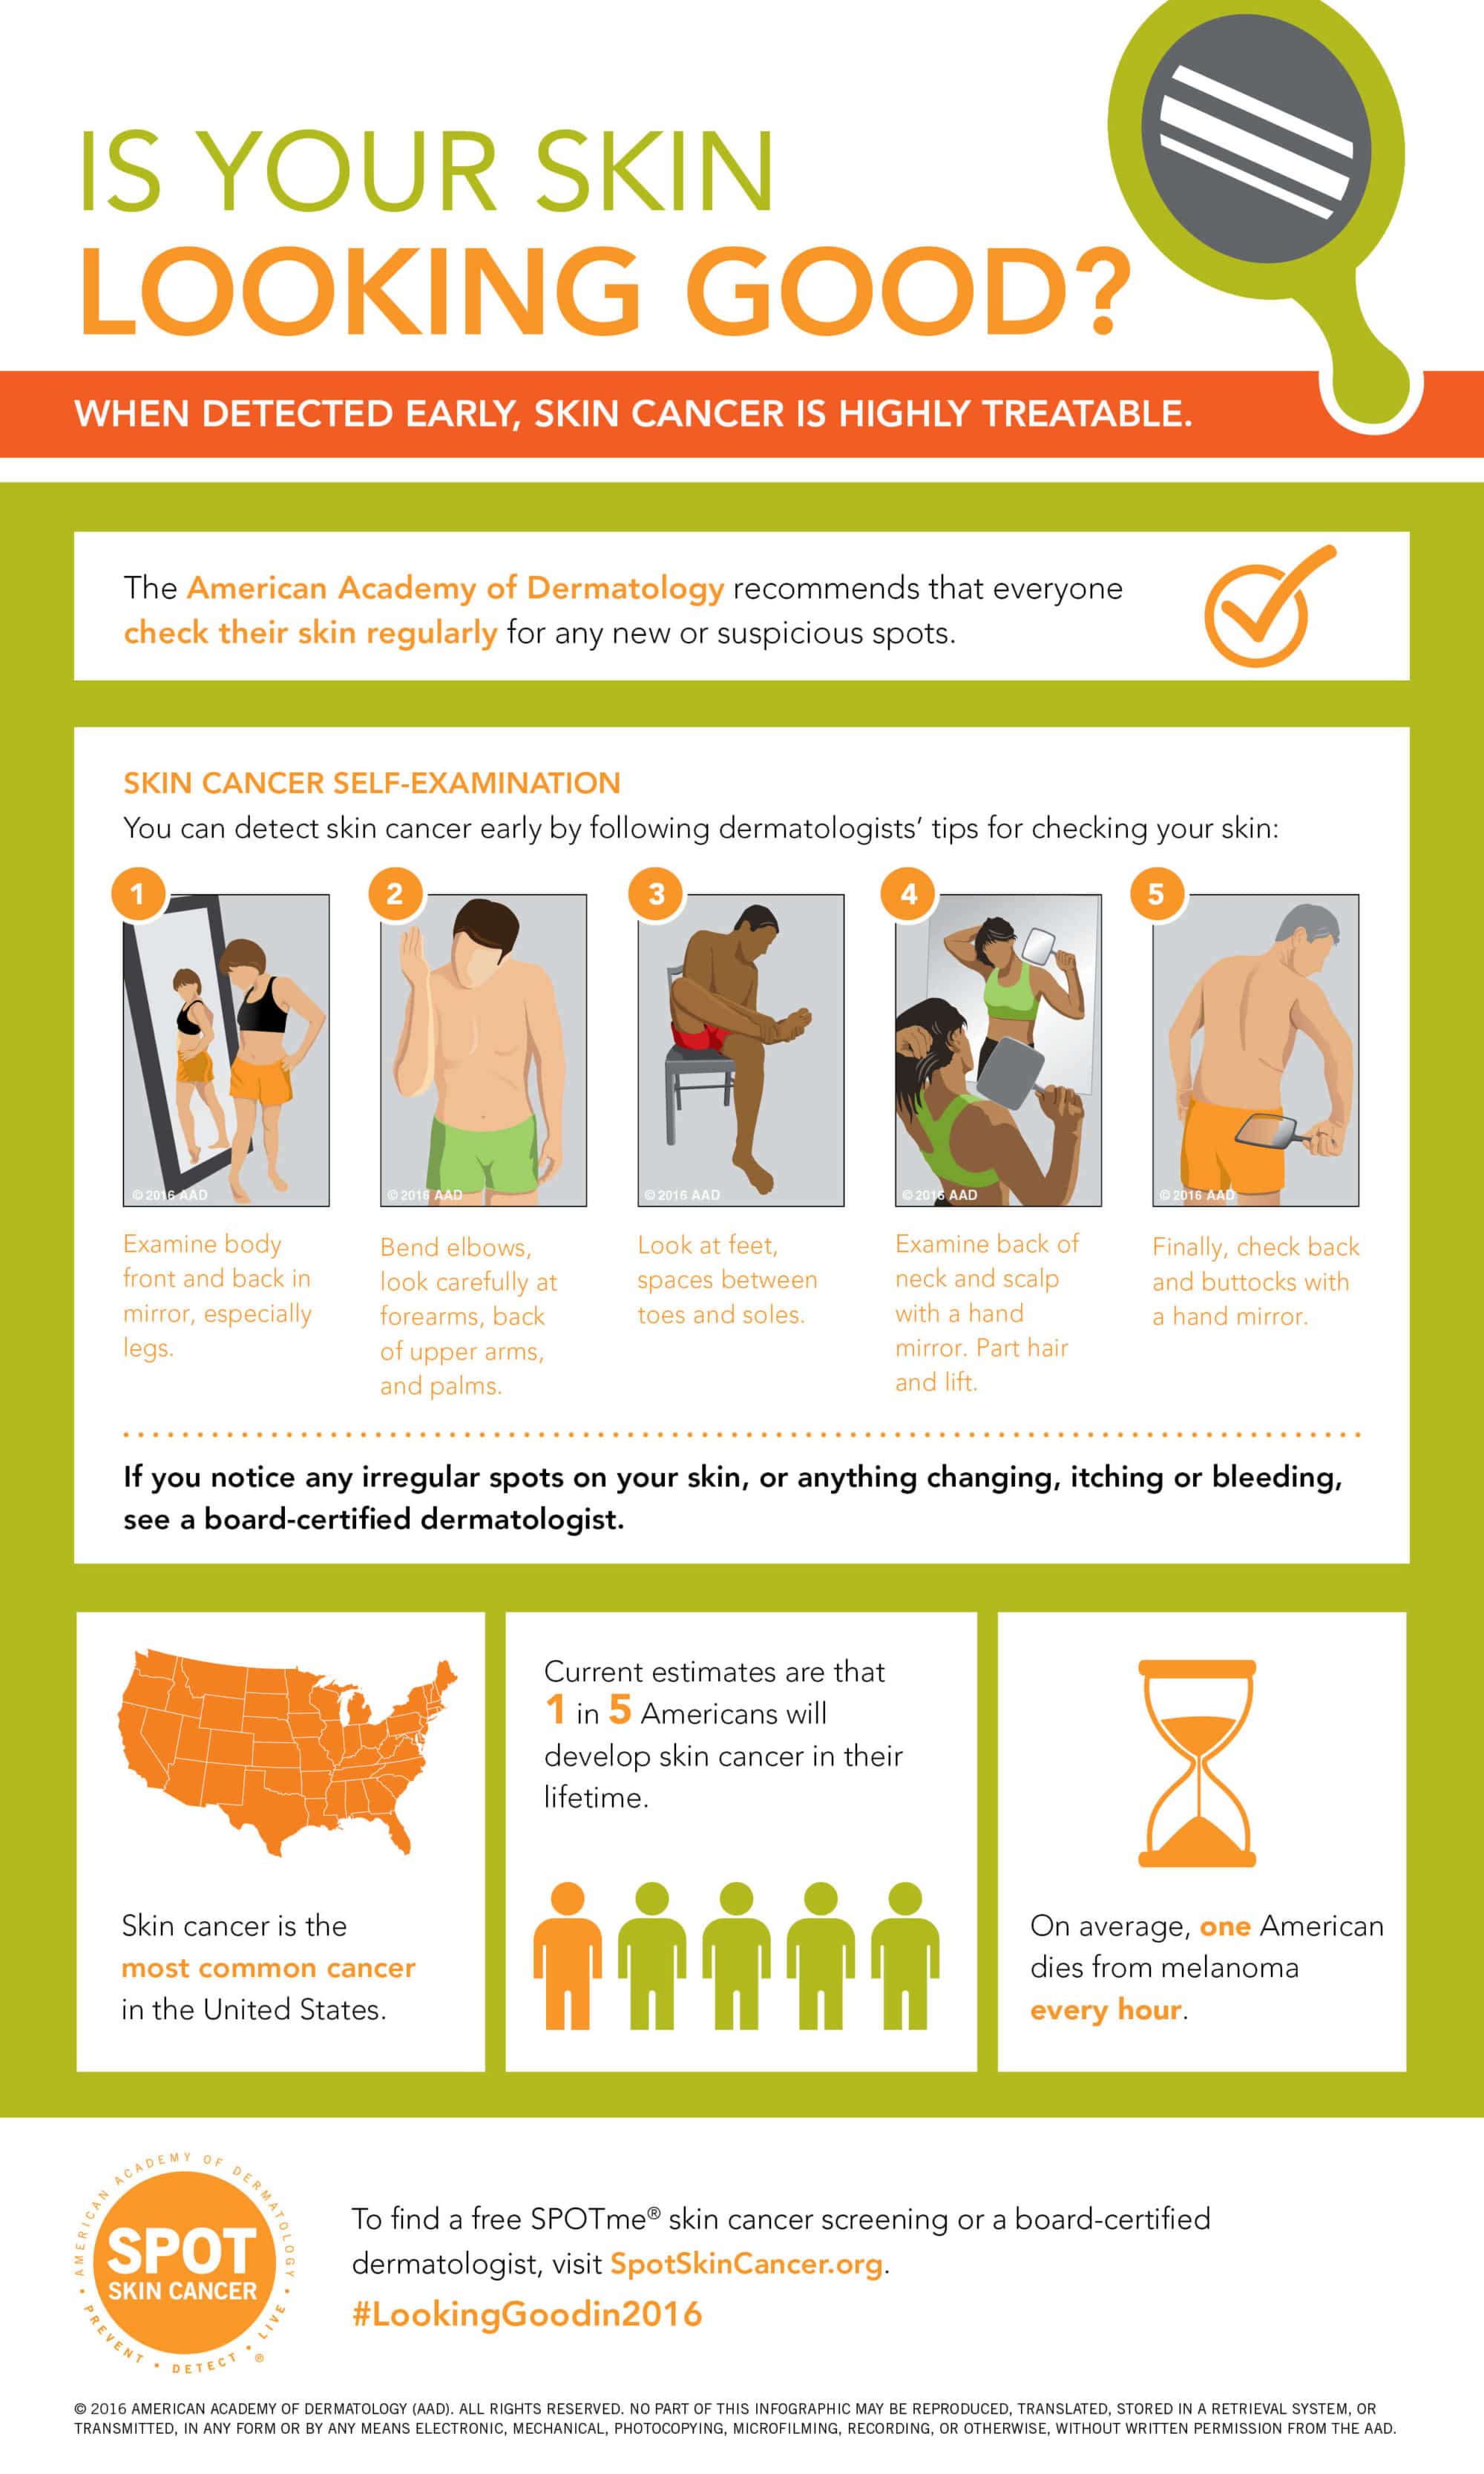 Learn how to Spot Skin Cancer - it's the most common cancer in the United States but it's preventable and highly treatable when spotted early 